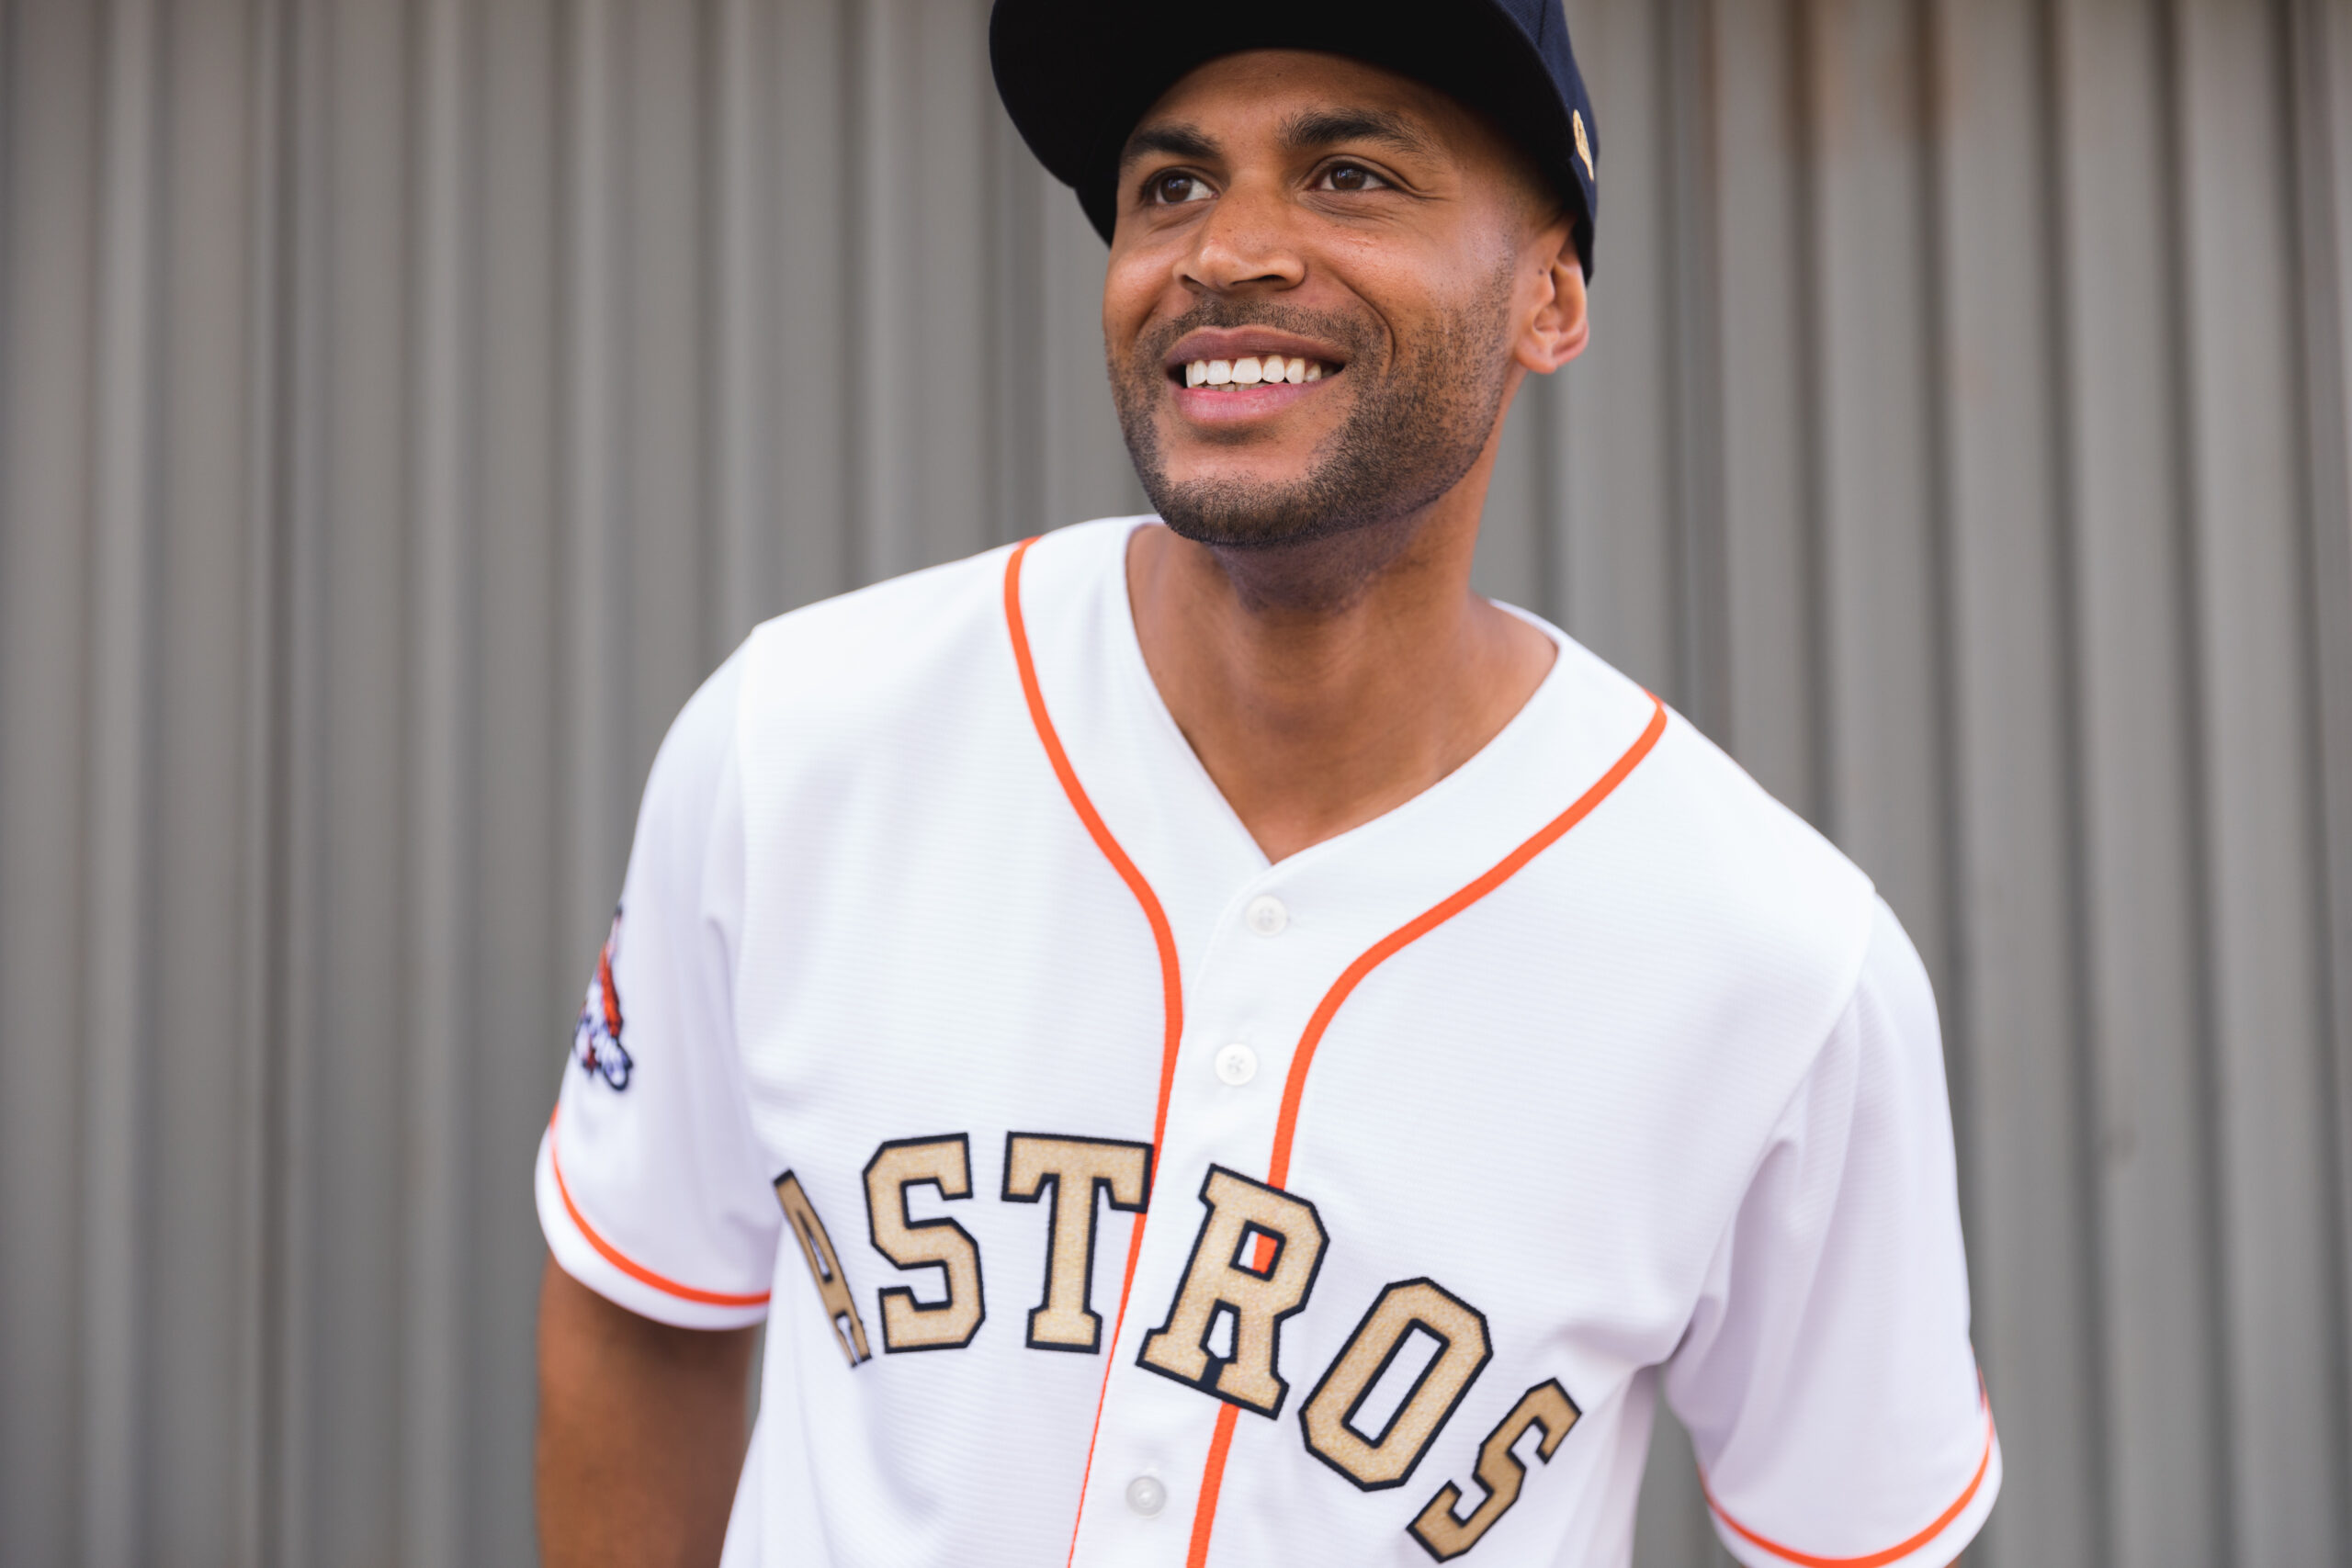 houston astros jersey outfit